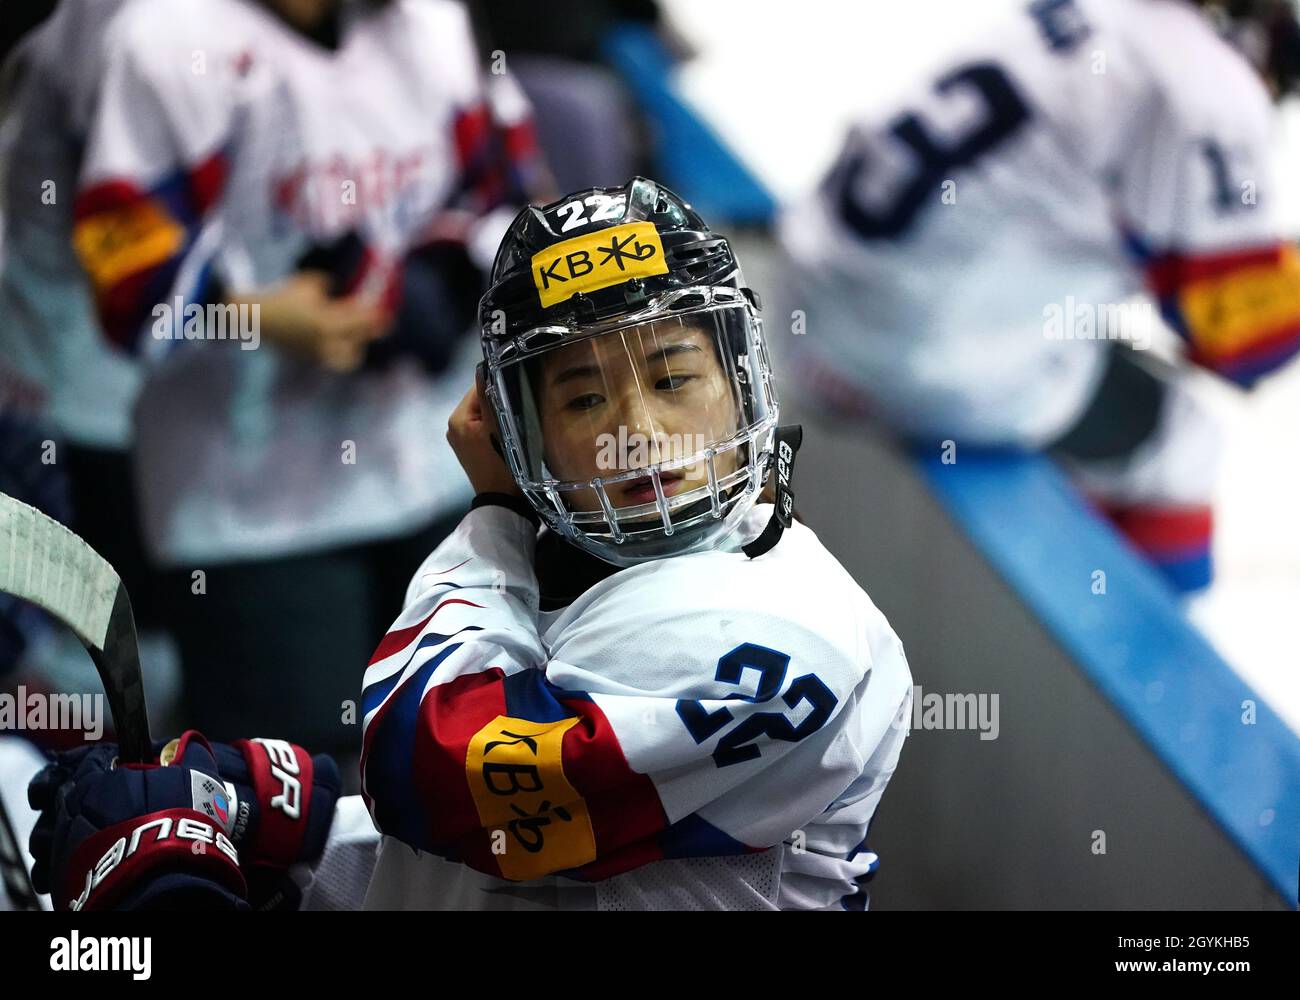 Republic of Korea’s Si Yun Jung during the Beijing 2022 Olympics Women's Pre-Qualification Round Two Group F match at the Motorpoint Arena, Nottingham. Stock Photo